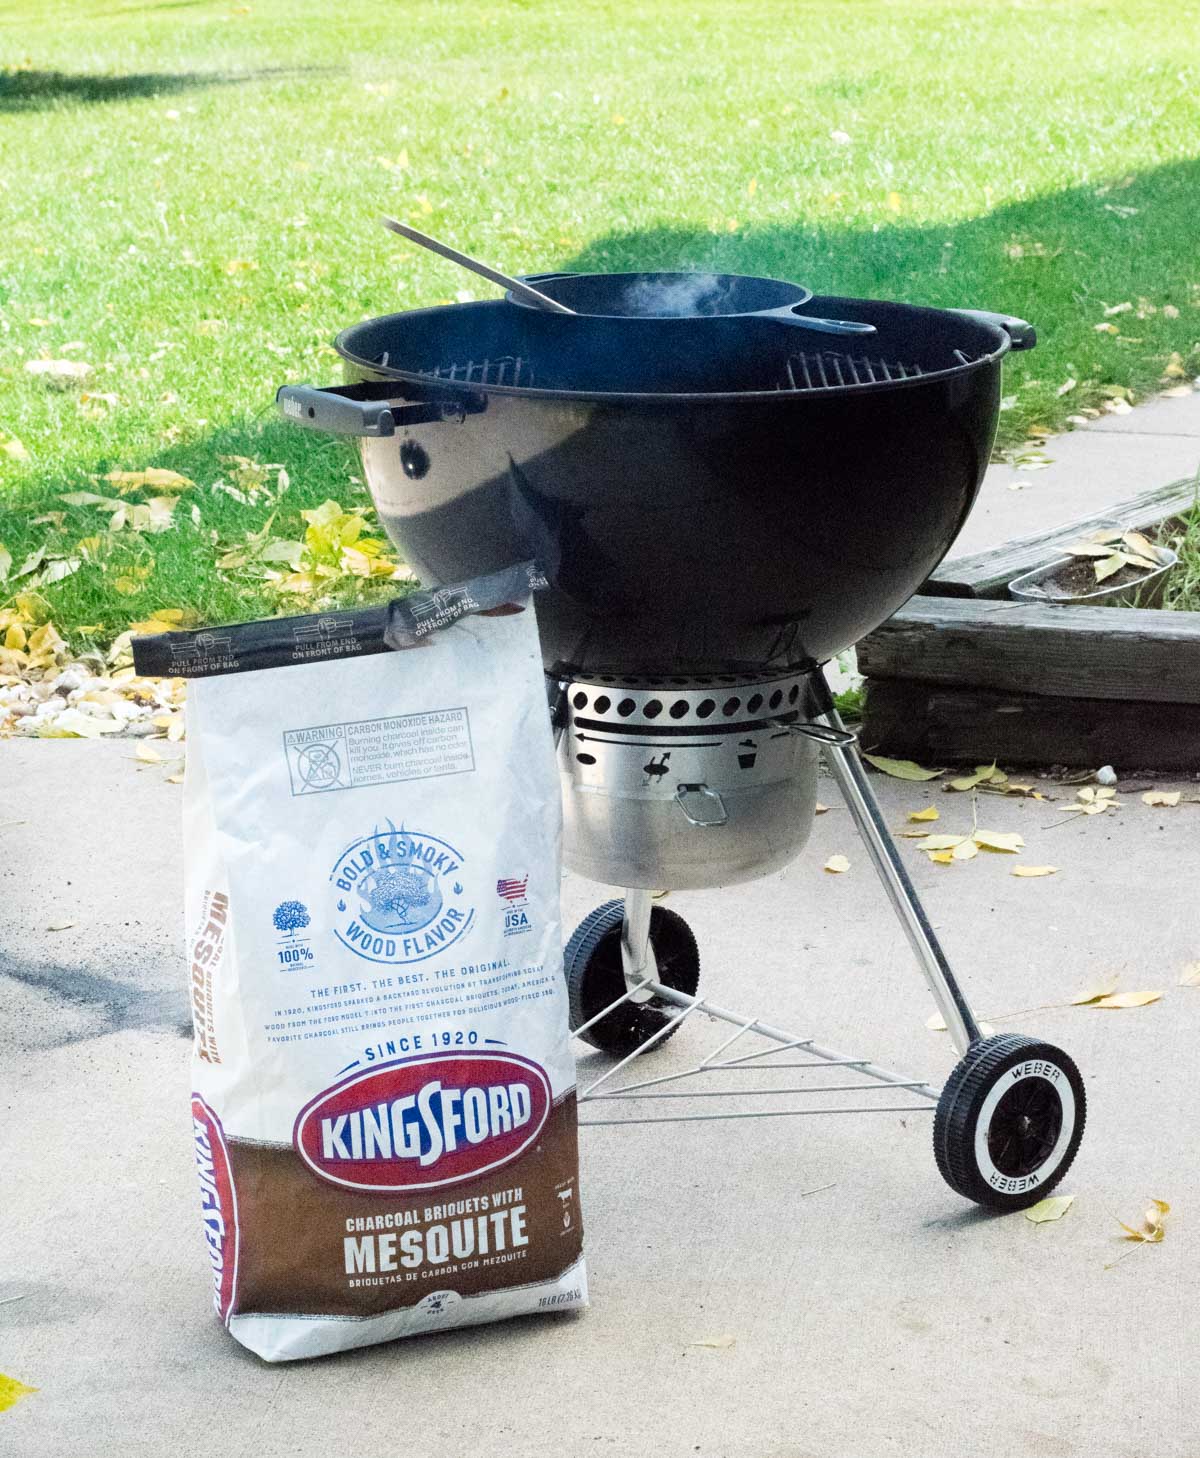 Kingsford Mesquite sitting by charcoal grill.